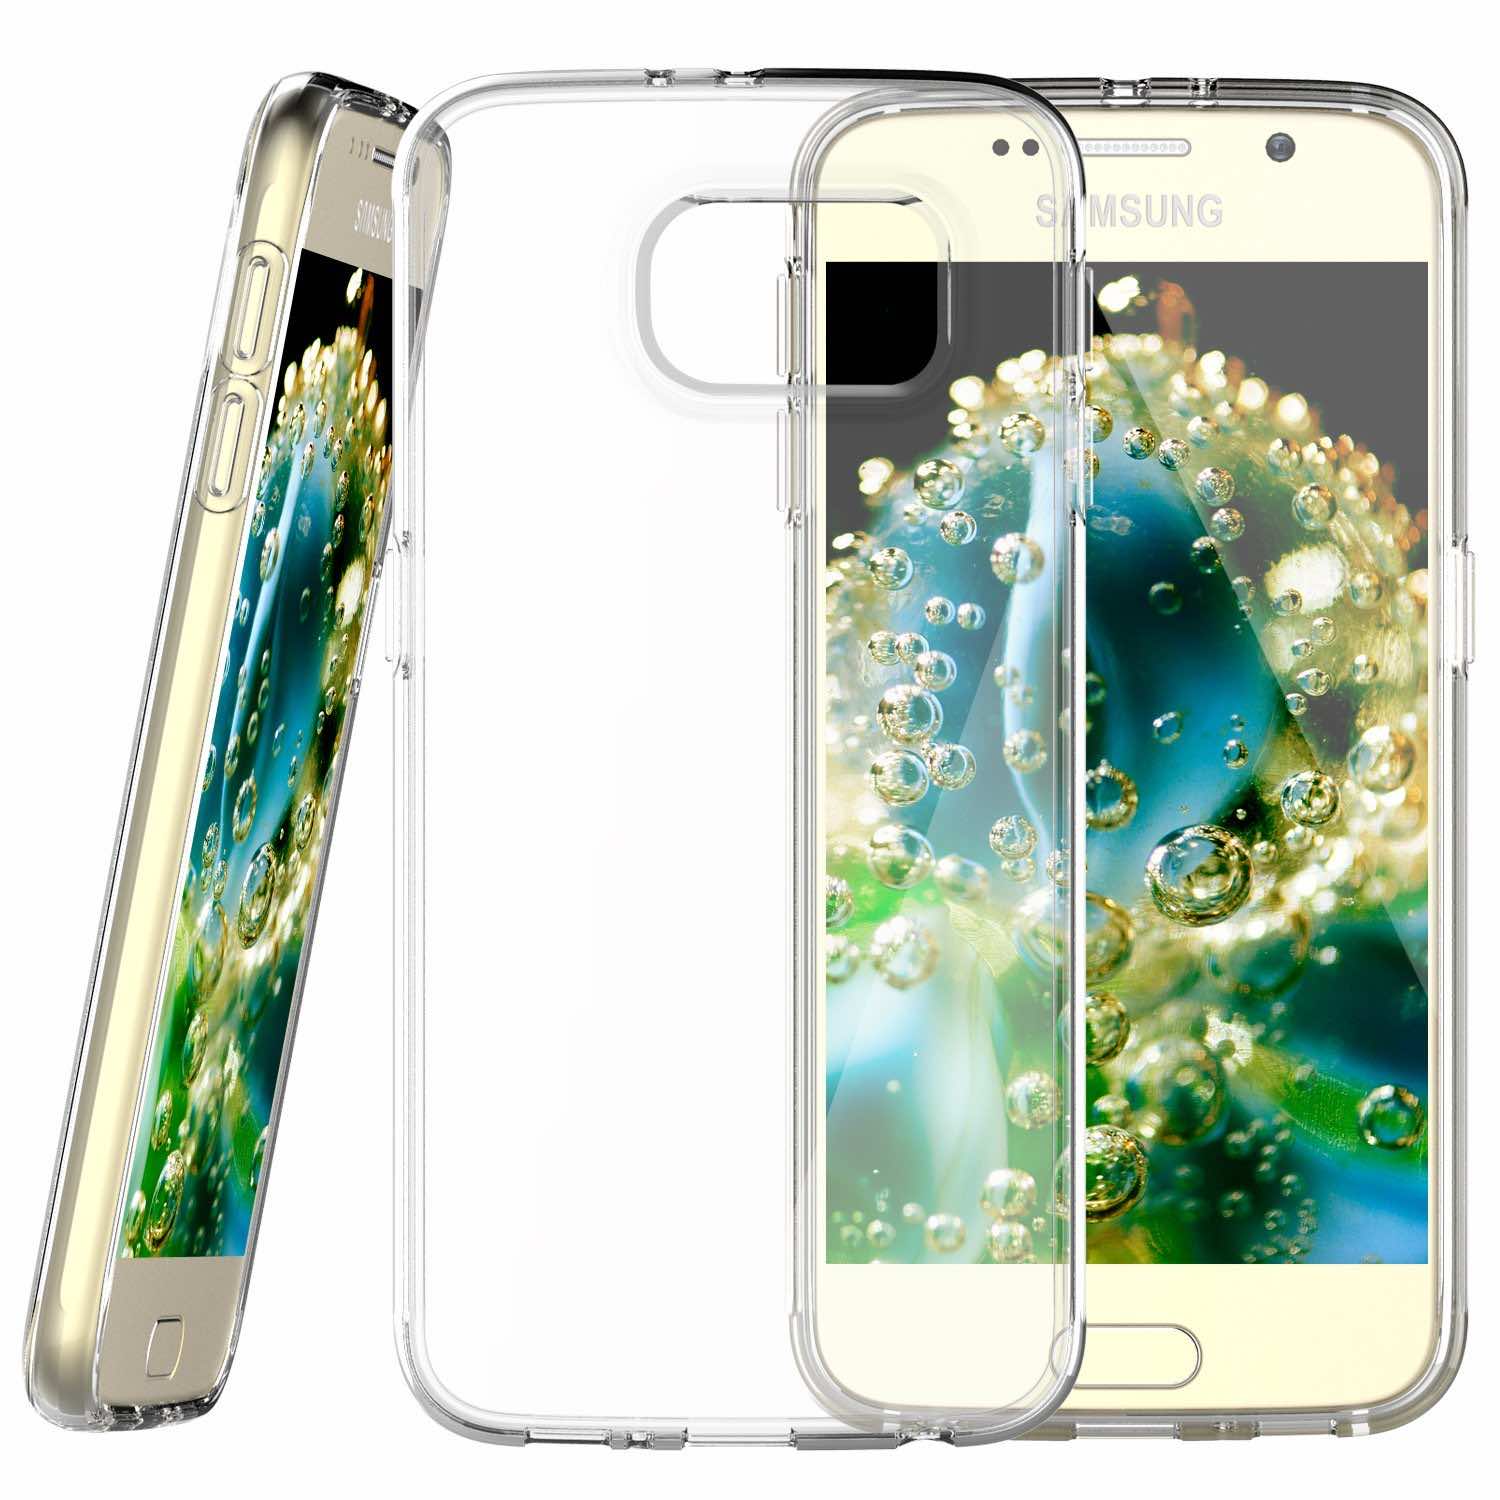 10 Best cases for Samsung S6 (9)